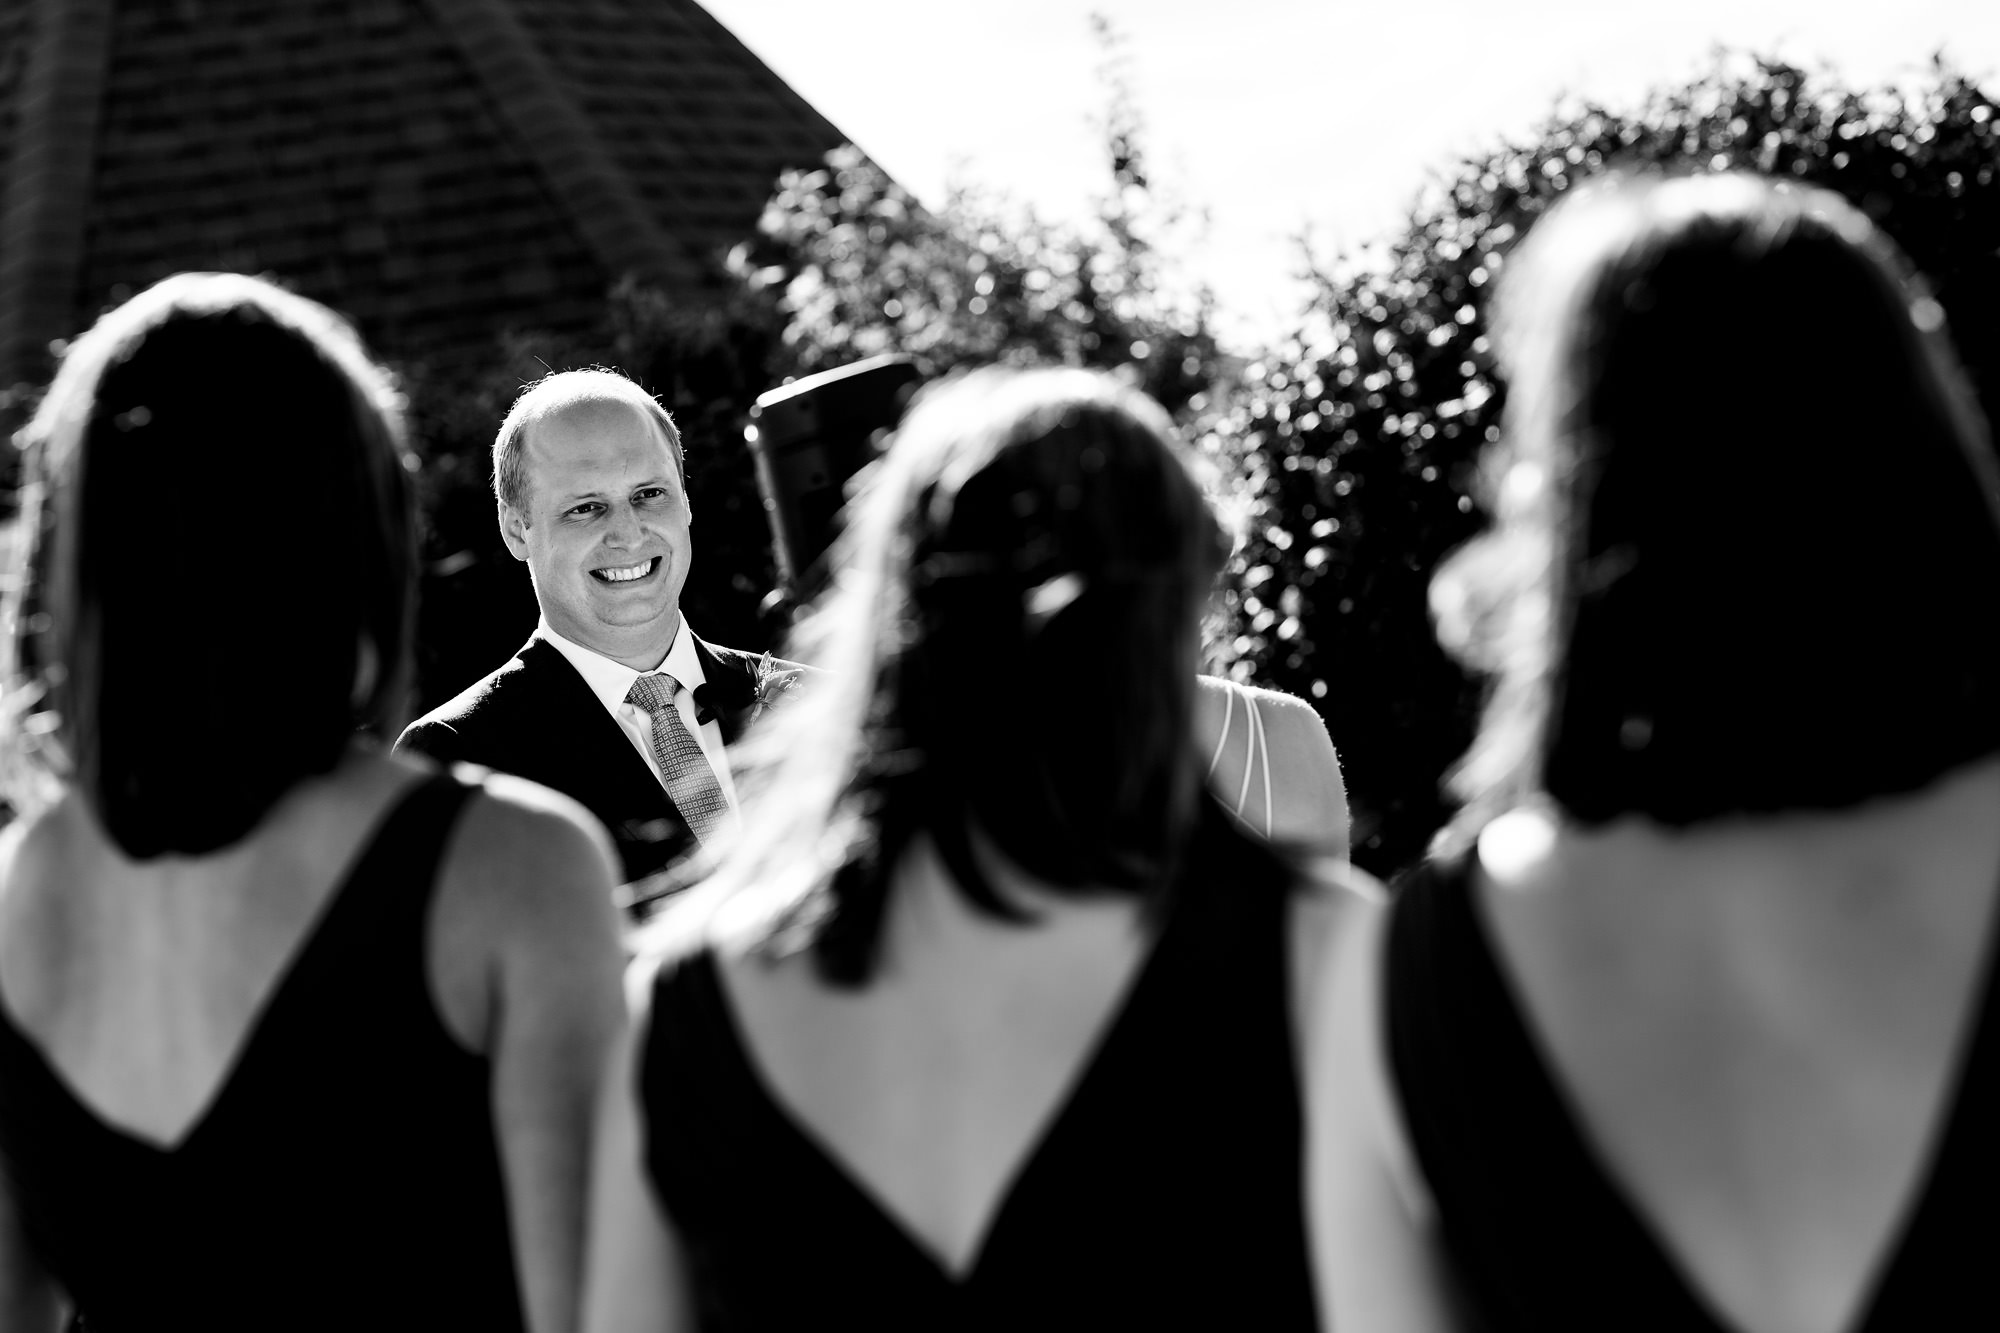 A groom smiles during his wedding ceremony at French's Point